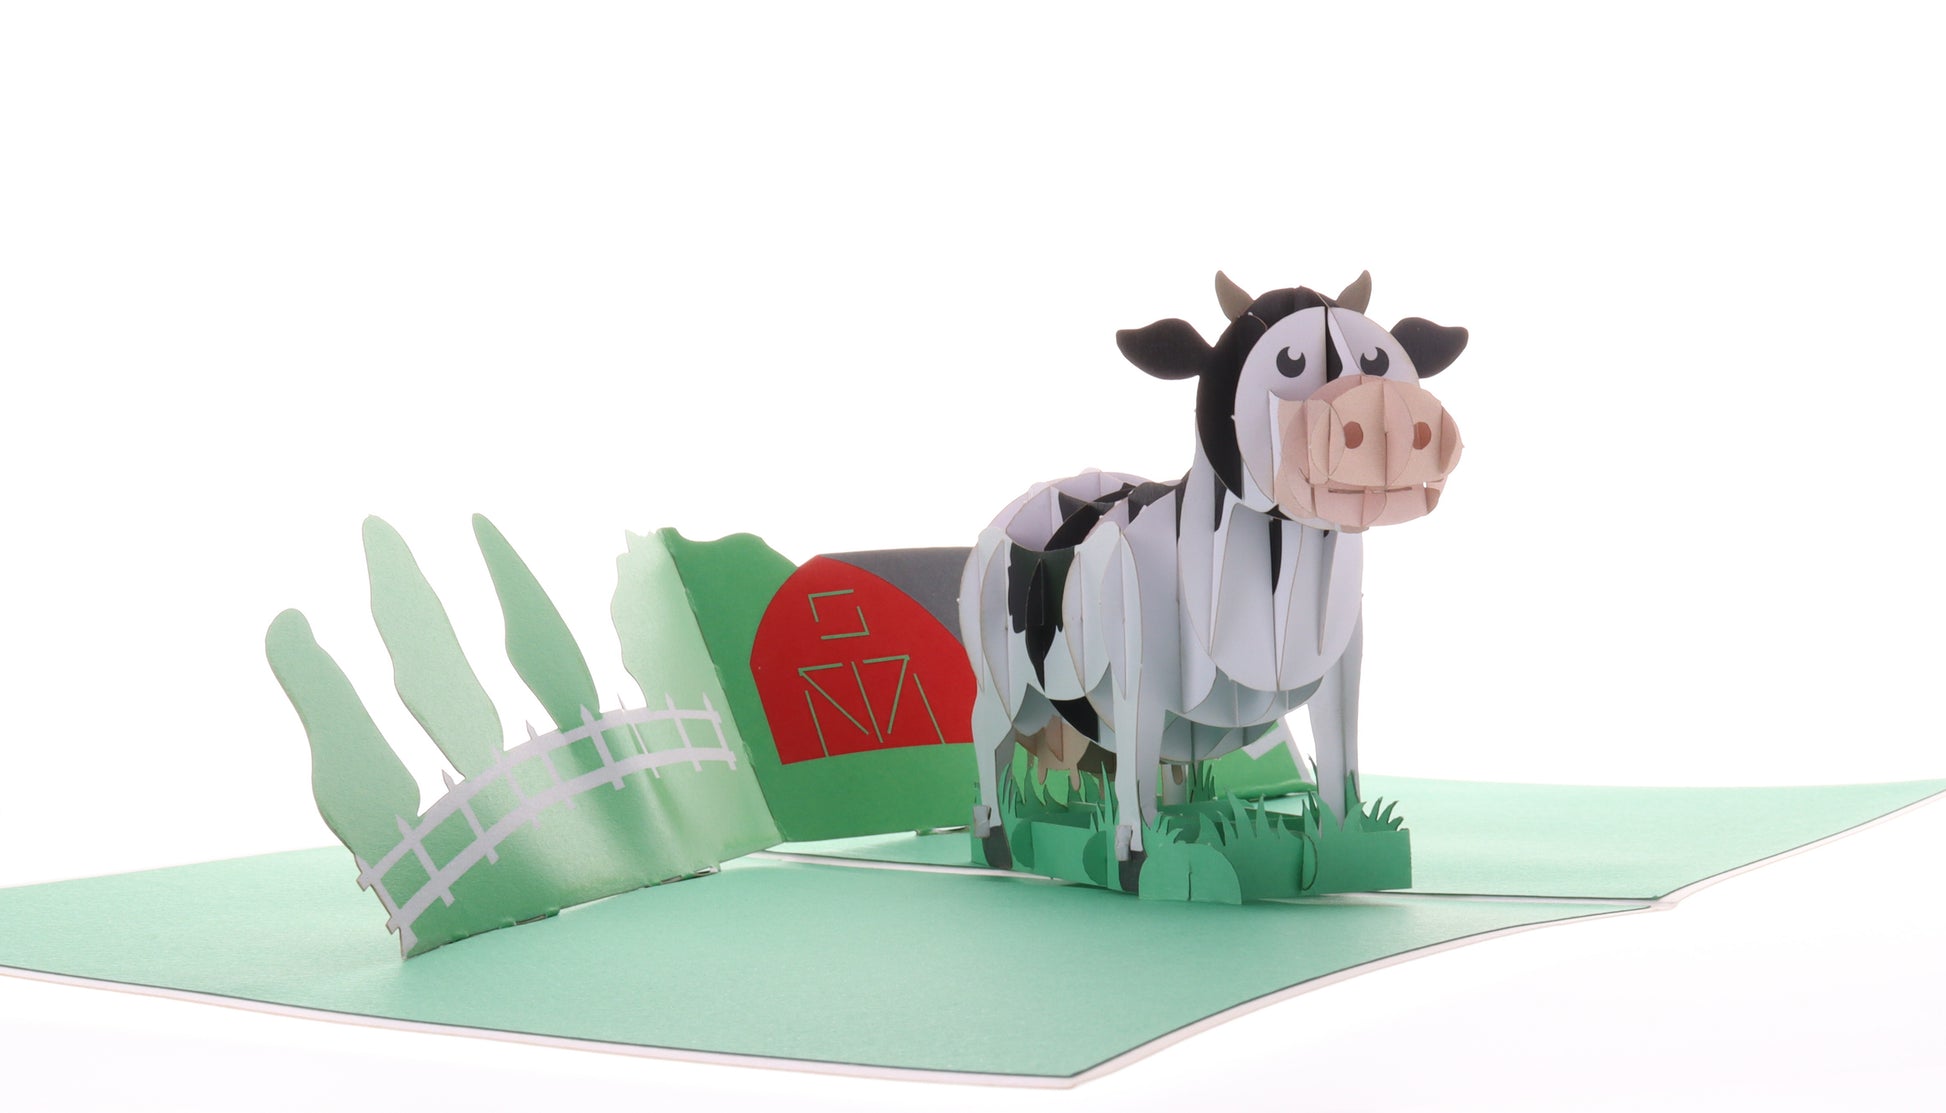 Dairy Cow and Barn 3D Pop Up Greeting Card - All Occasion - Birthday - Friendship - Just Because - n - iGifts And Cards